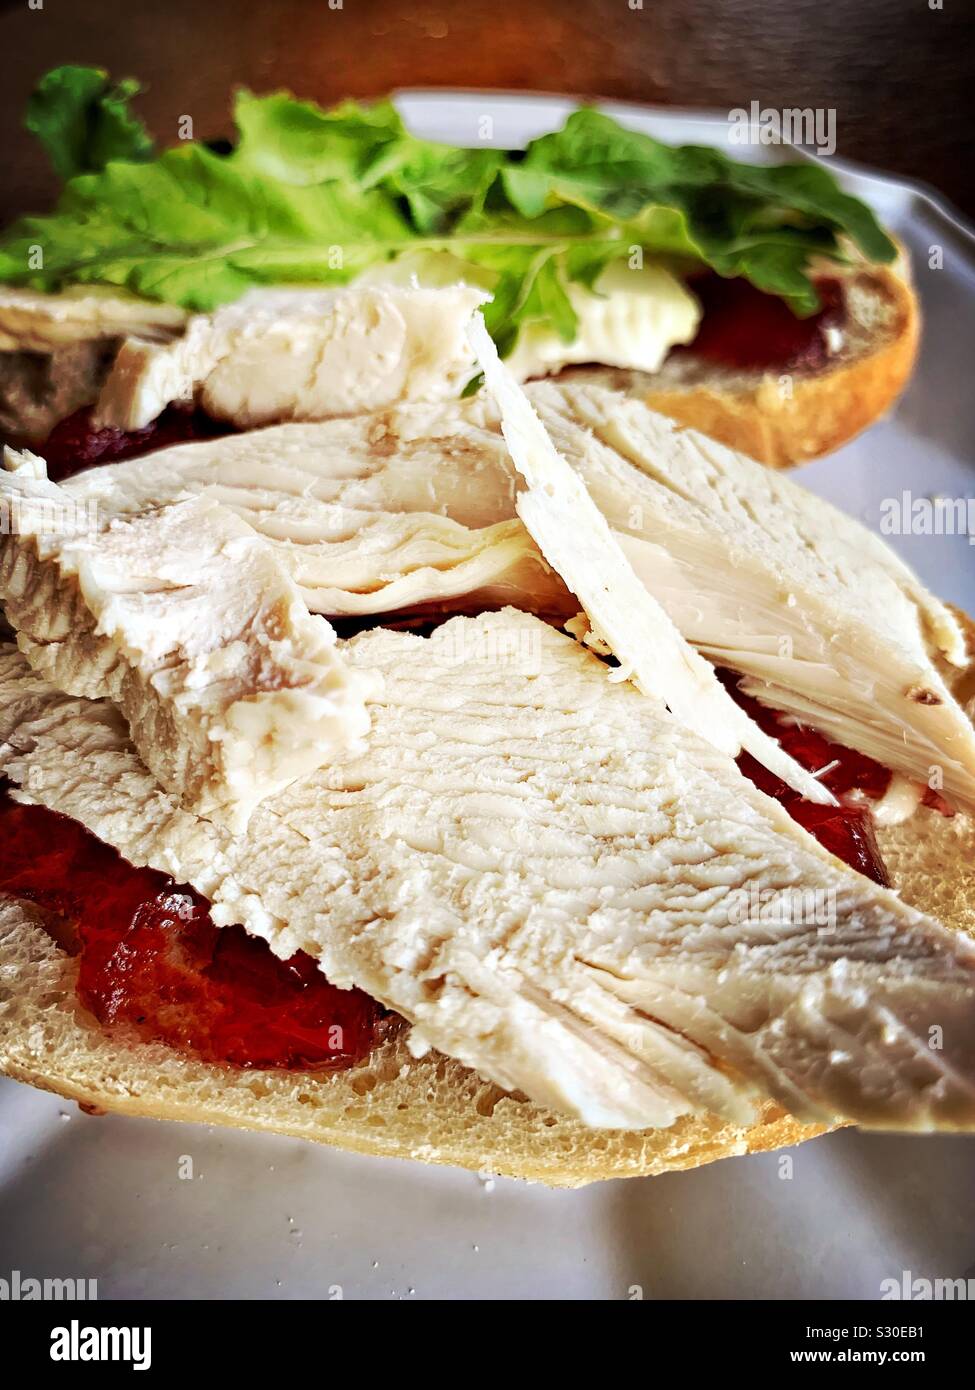 Leftover turkey is used to make a delicious sandwich with arugula, Brie cheese, and cranberry sauce. Stock Photo